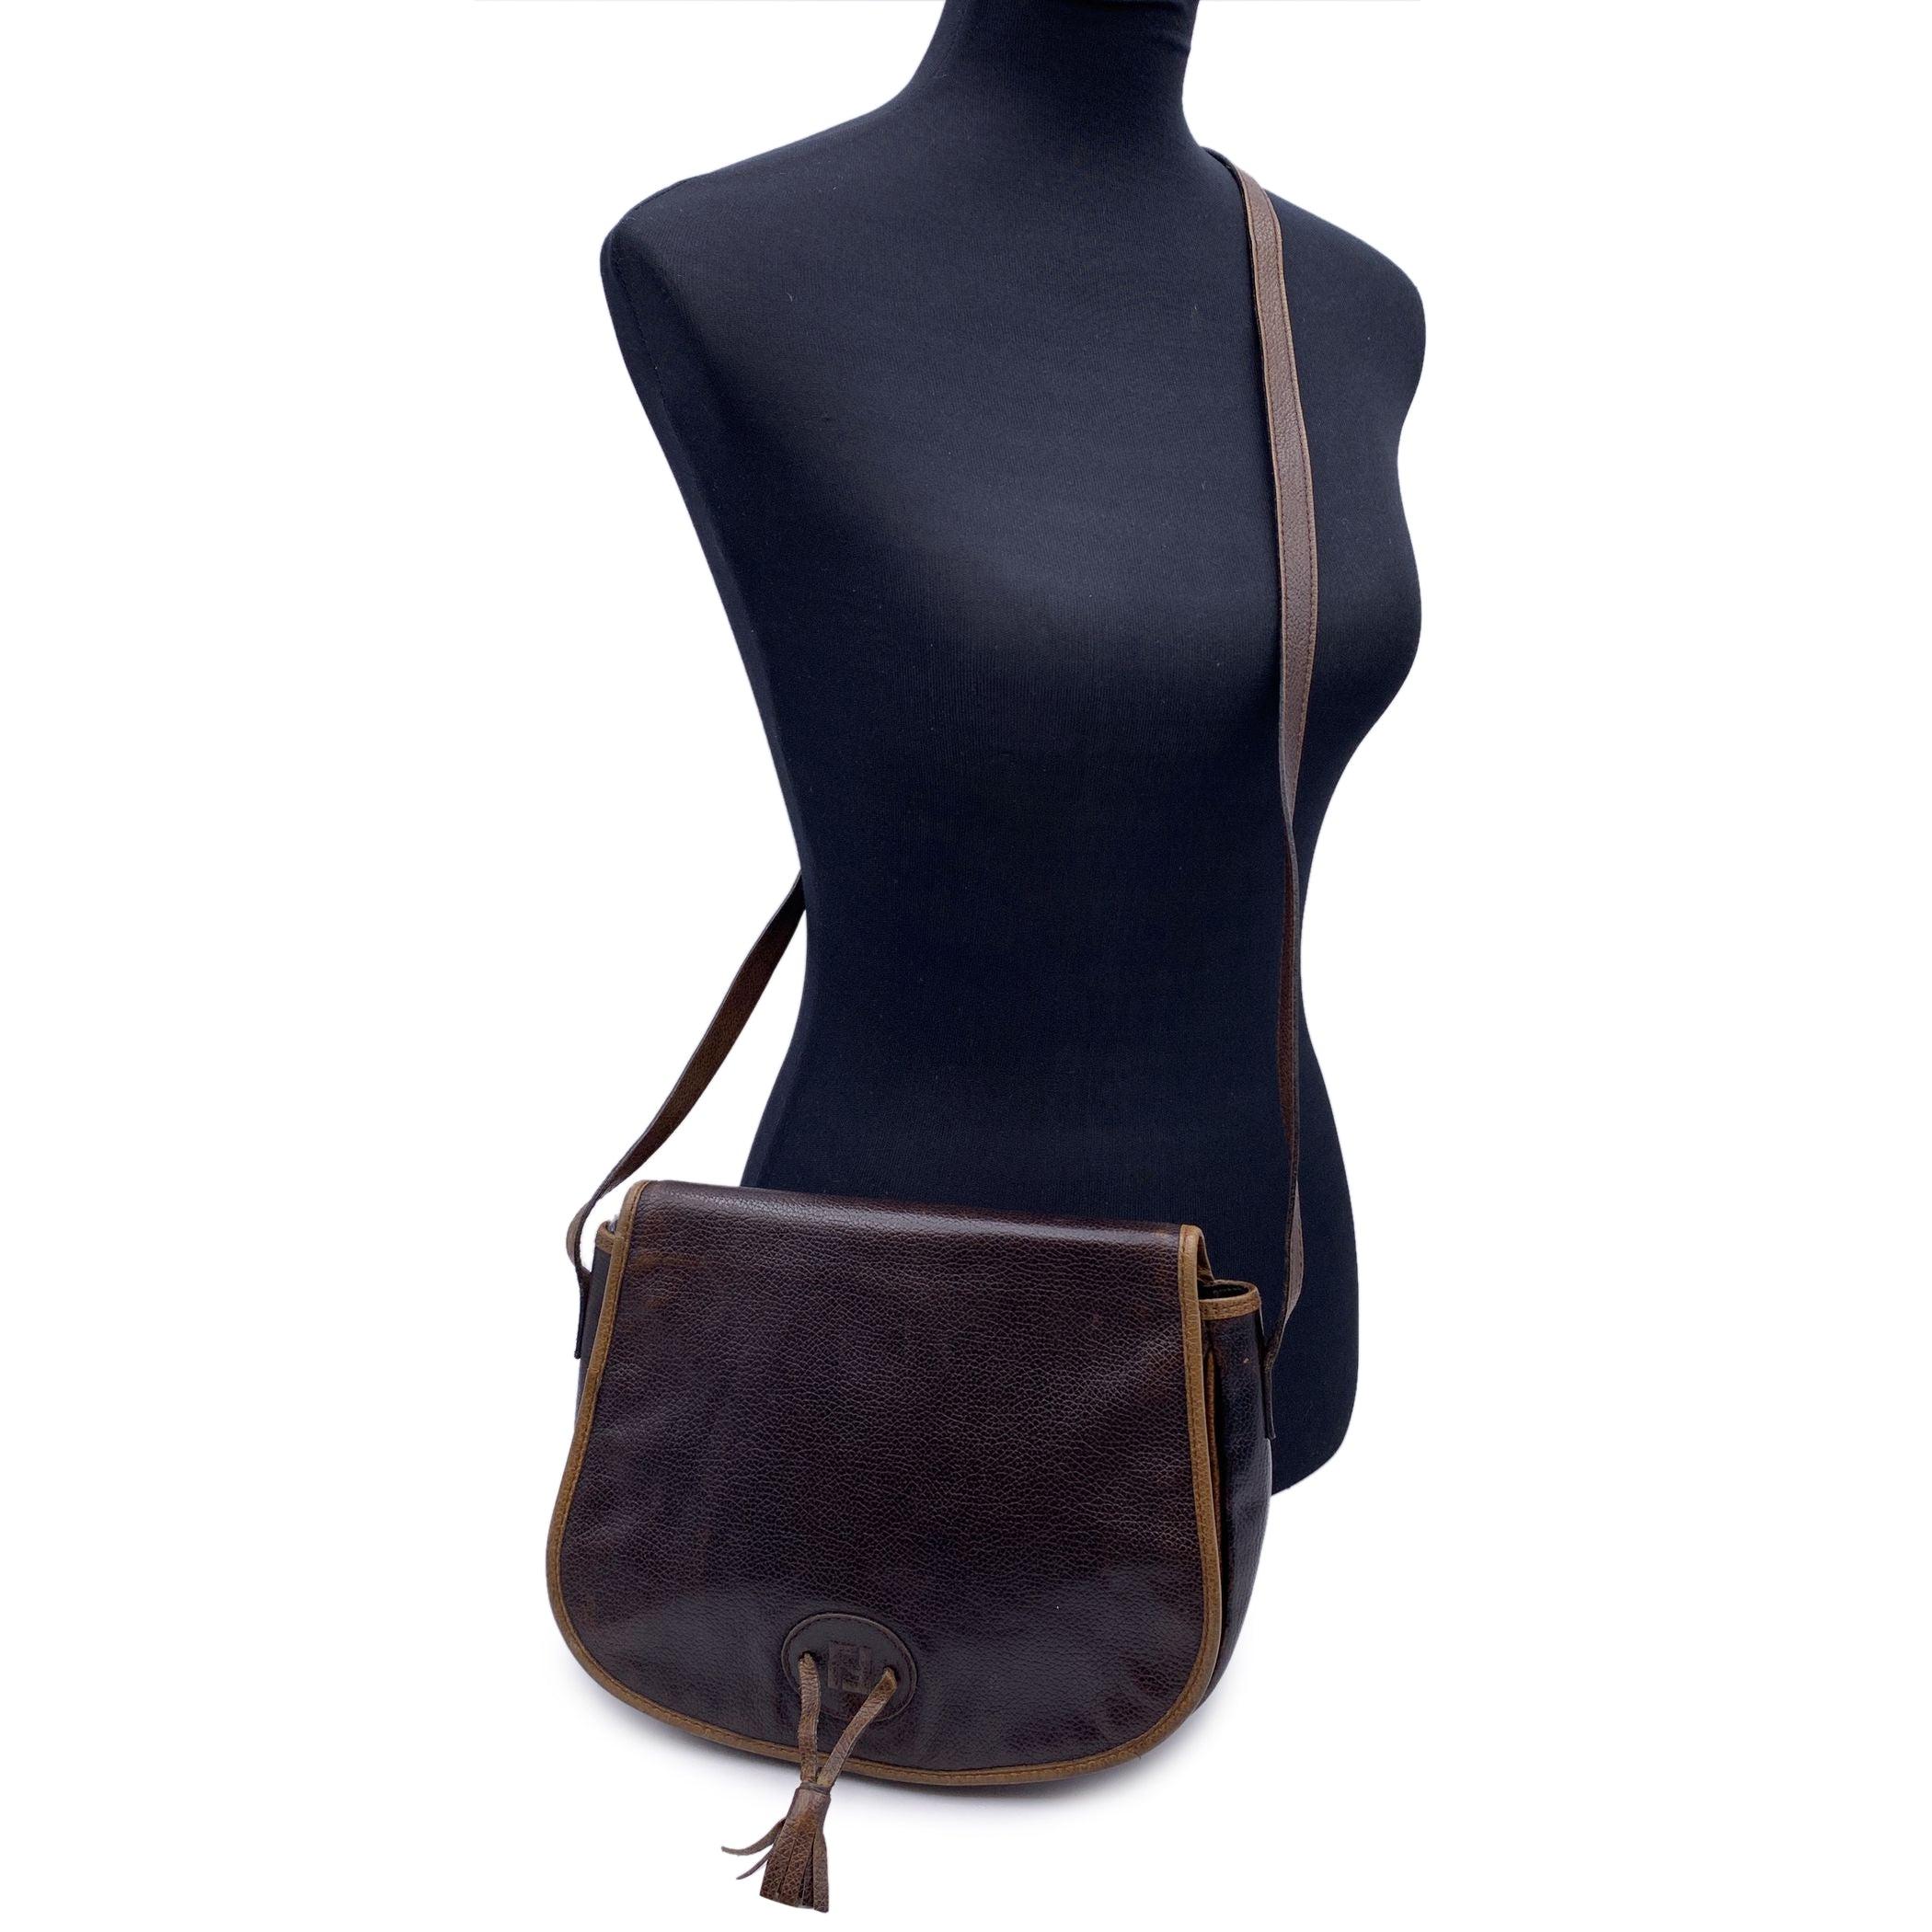 Fendi Vintage Shoulder bag. Dark brown leather and tan leather. Flap with magnetic butttons closure. FF - Fendi logo and tassels on the front. Brown leather lining. 1 side zip pocket inside. Adjustable shoulder strap. 'FENDI s.a.s. Roma - Made in